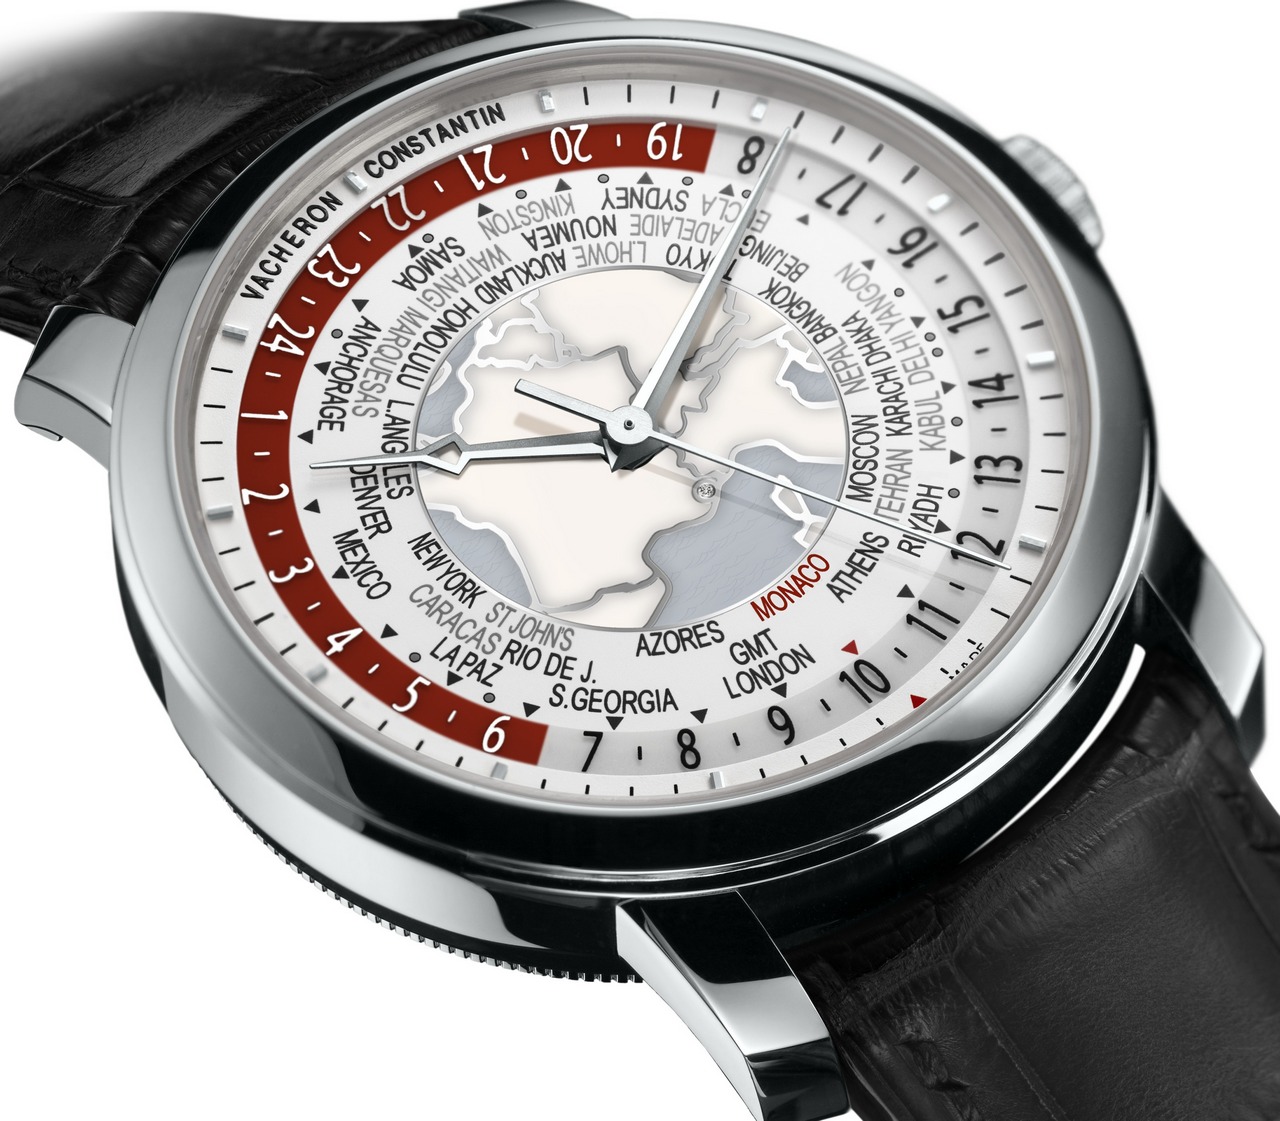 anteprima-only-watch-2013-vacheron-constantin-patrimony-traditionnelle-world-time_0-100_2